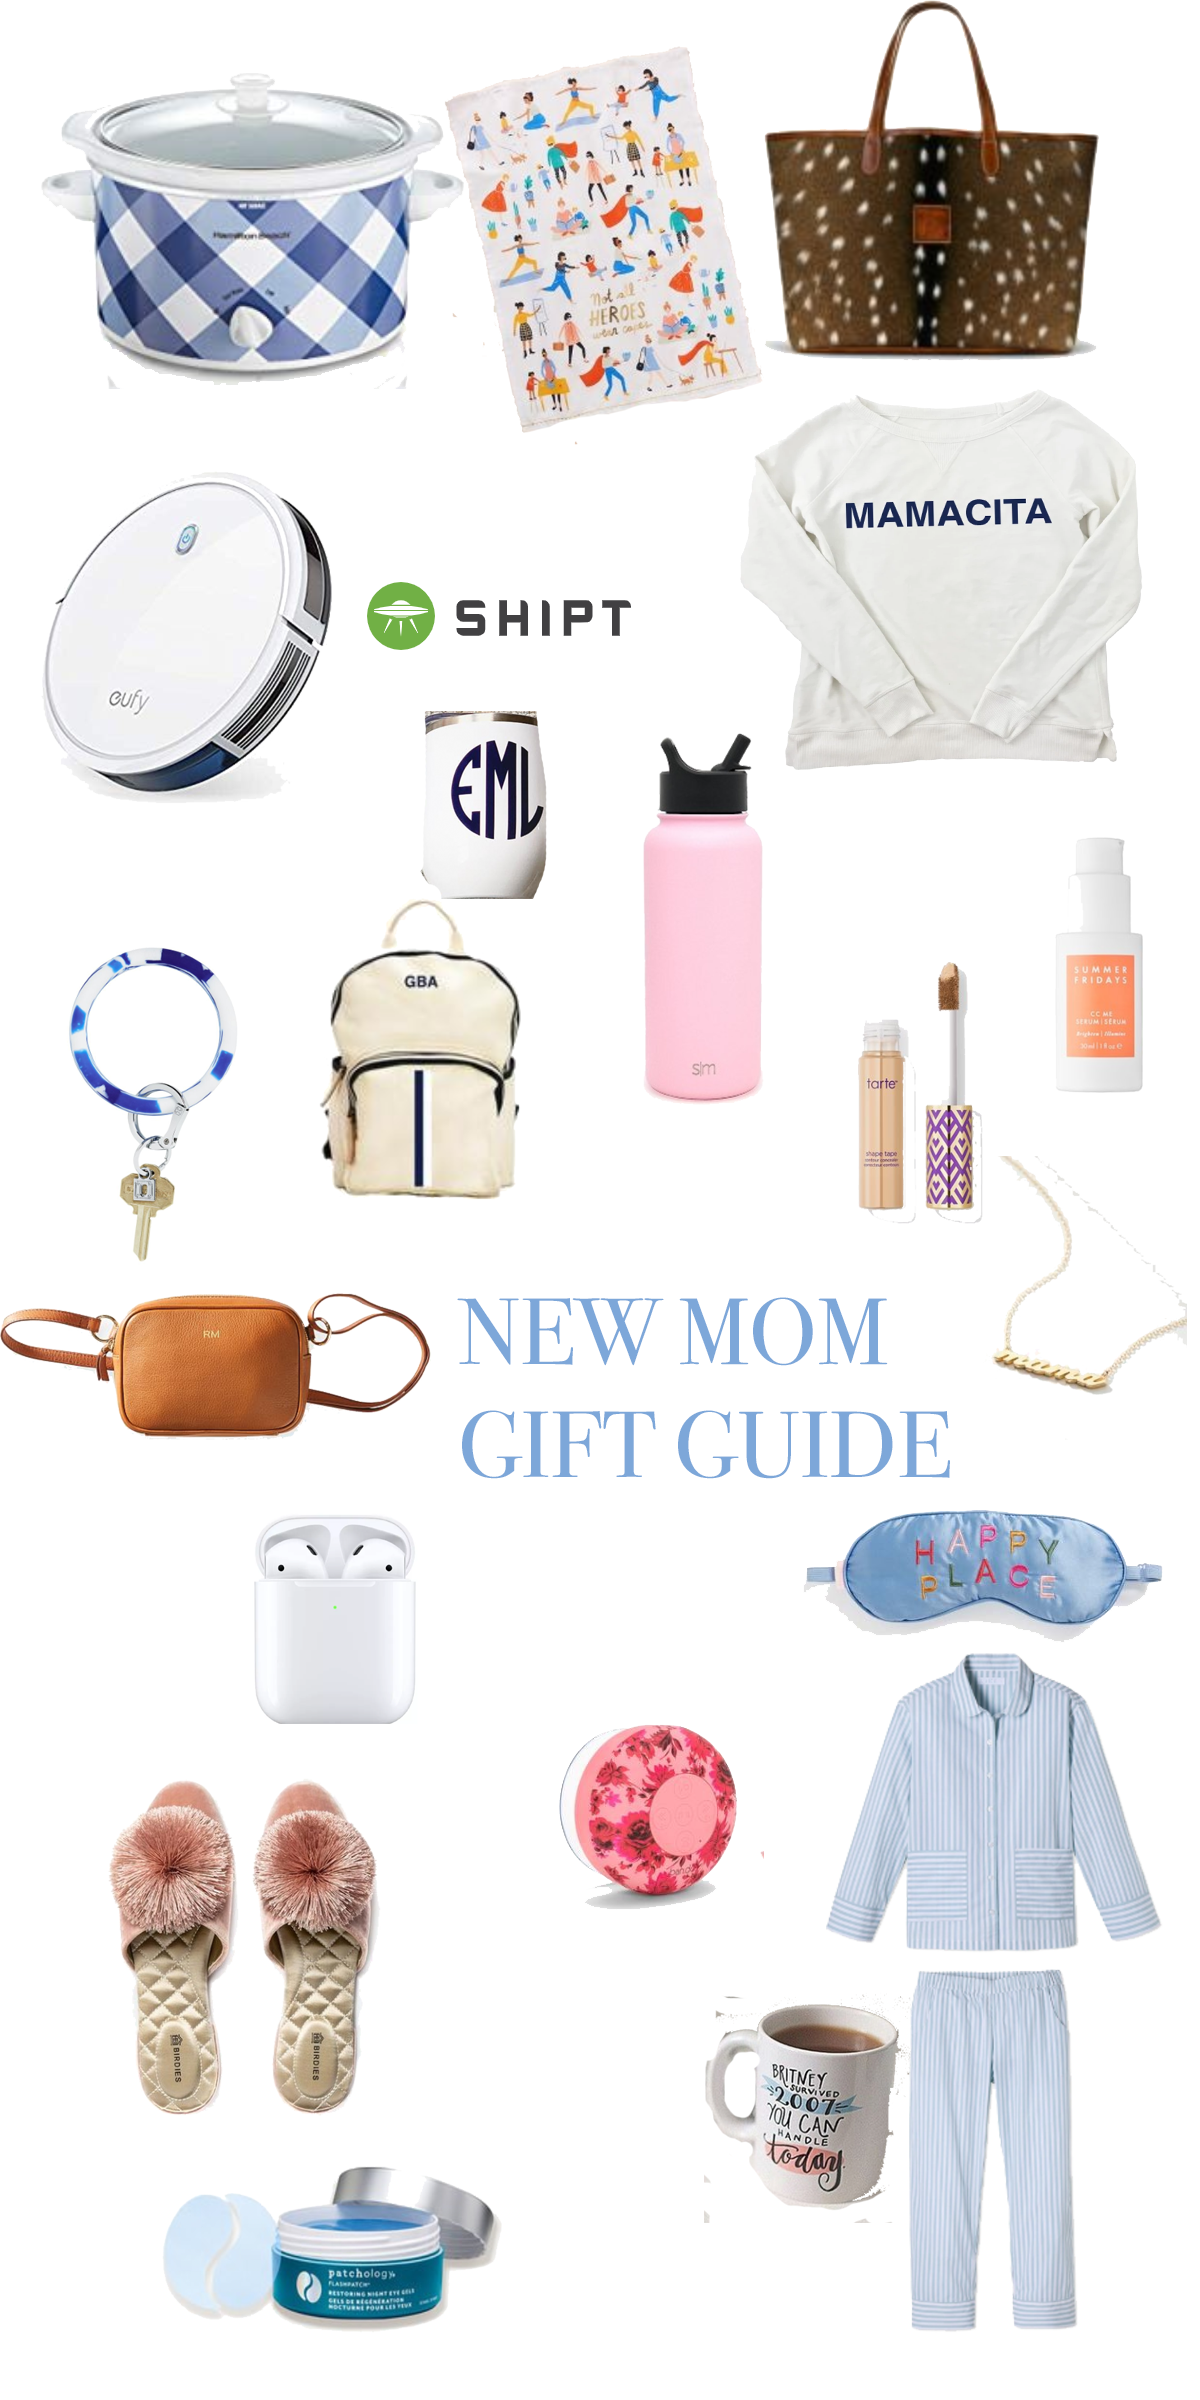 Gifts for Mother in law / grandma / Mother - Sarah Tucker